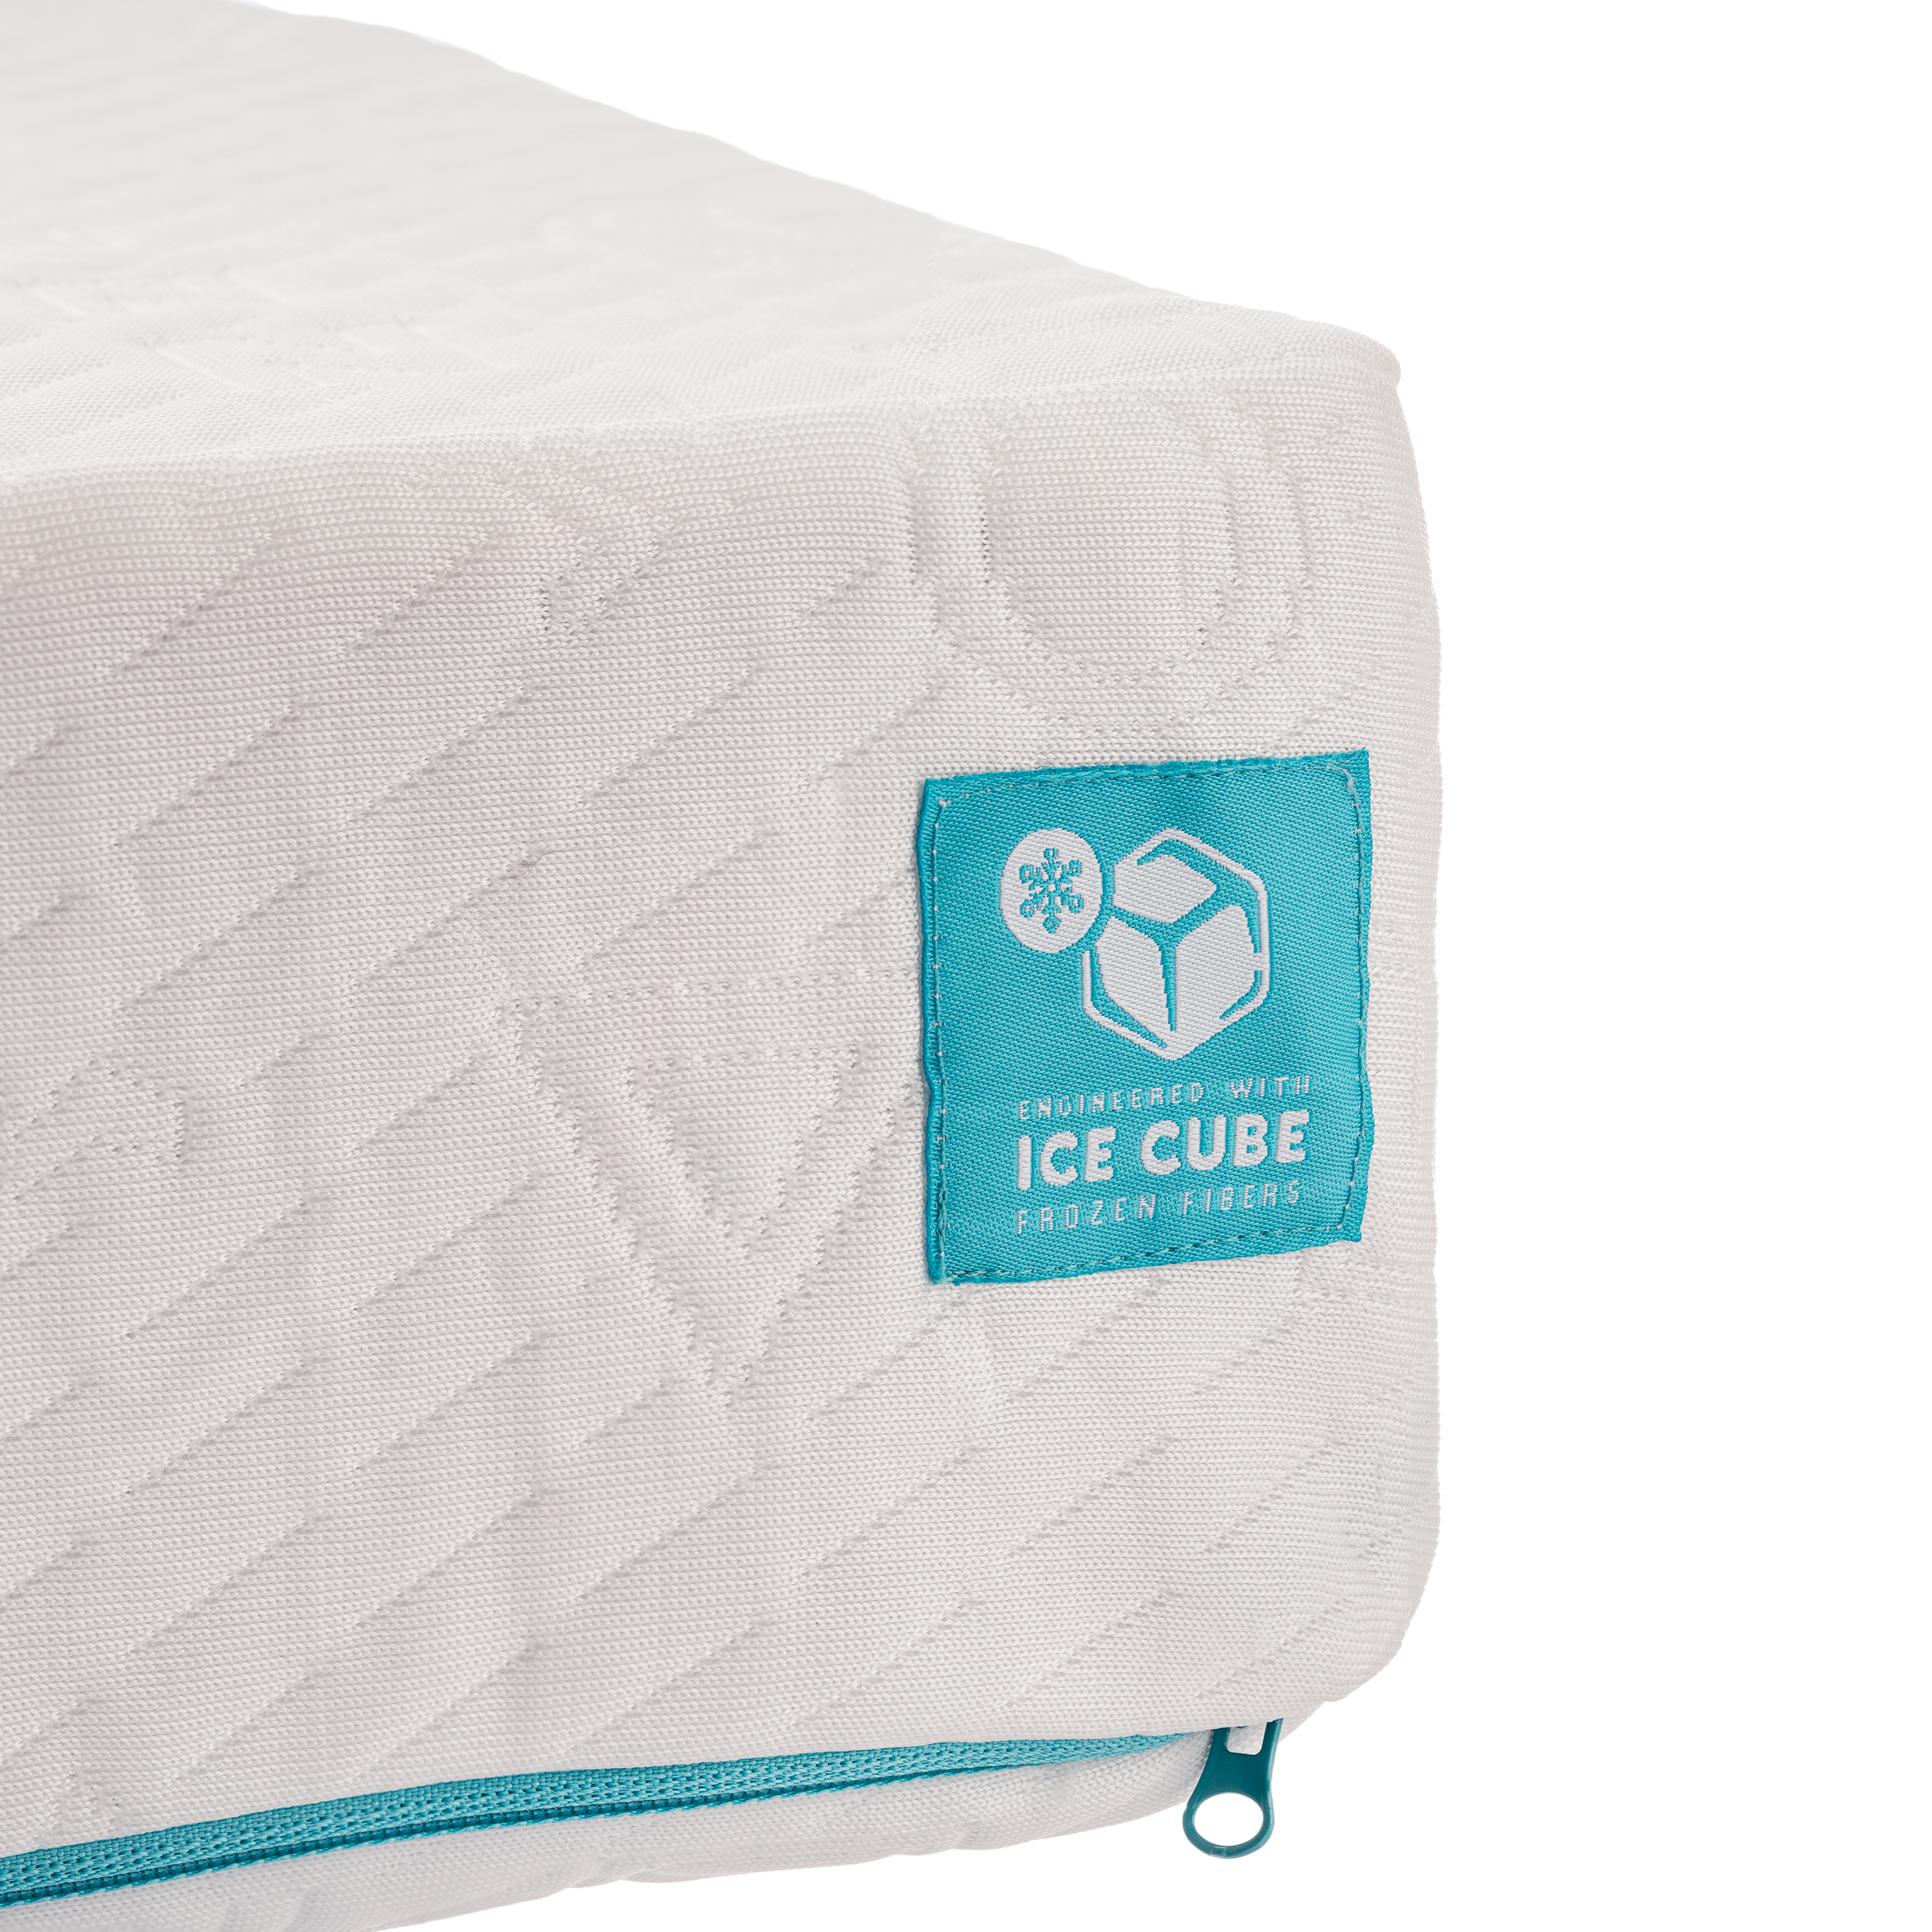 Pillow Cube Classic 12 x 12 x 5 Cooling Memory Foam Bed Pillow for Side  Sleeping Support 